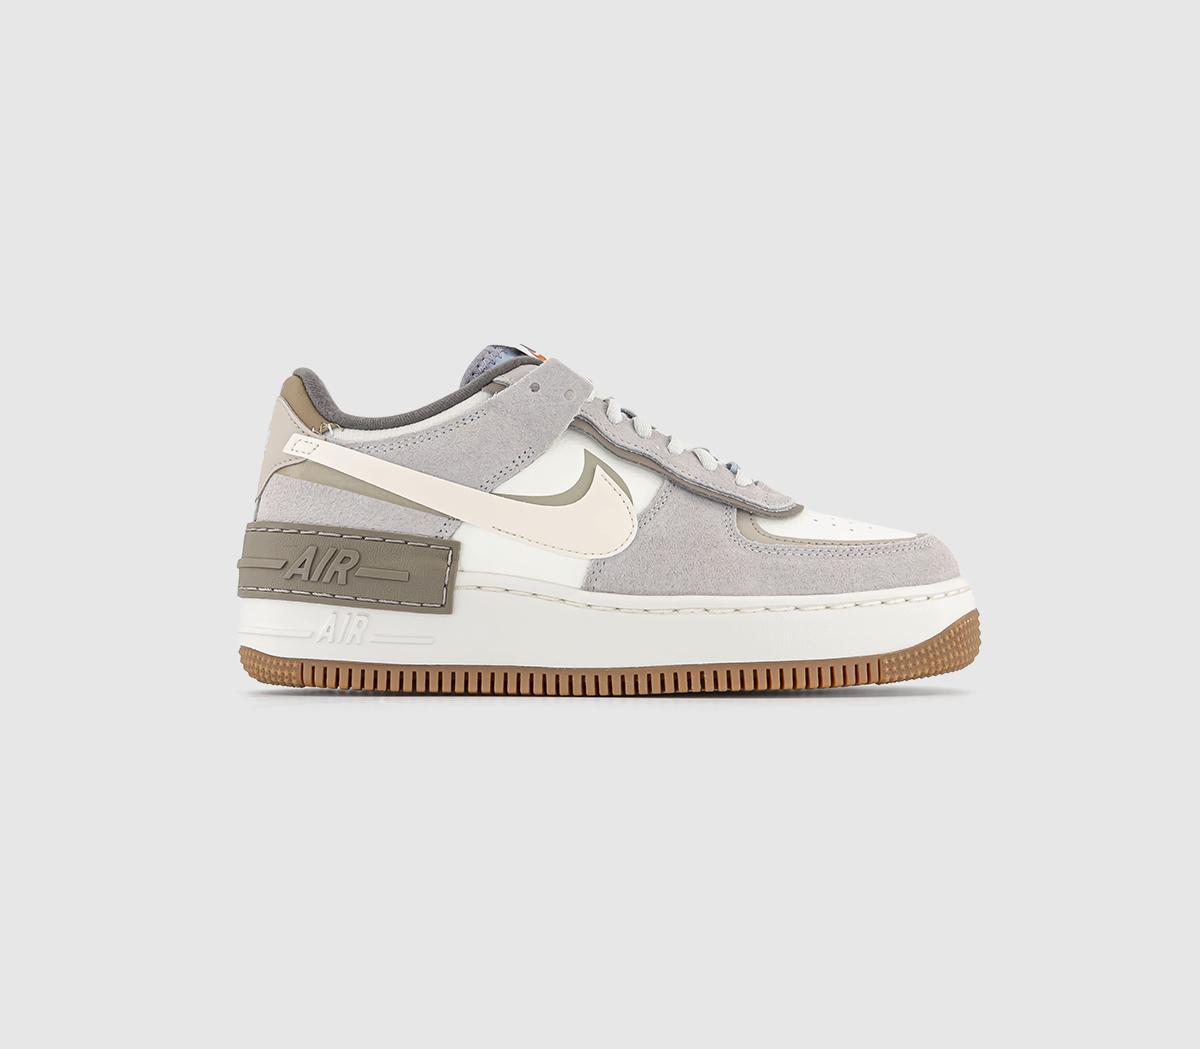 Nike Air Force 1 Trainers Shadow Sail Pale Ivory Sail Grey Fog Provence Purple Cave